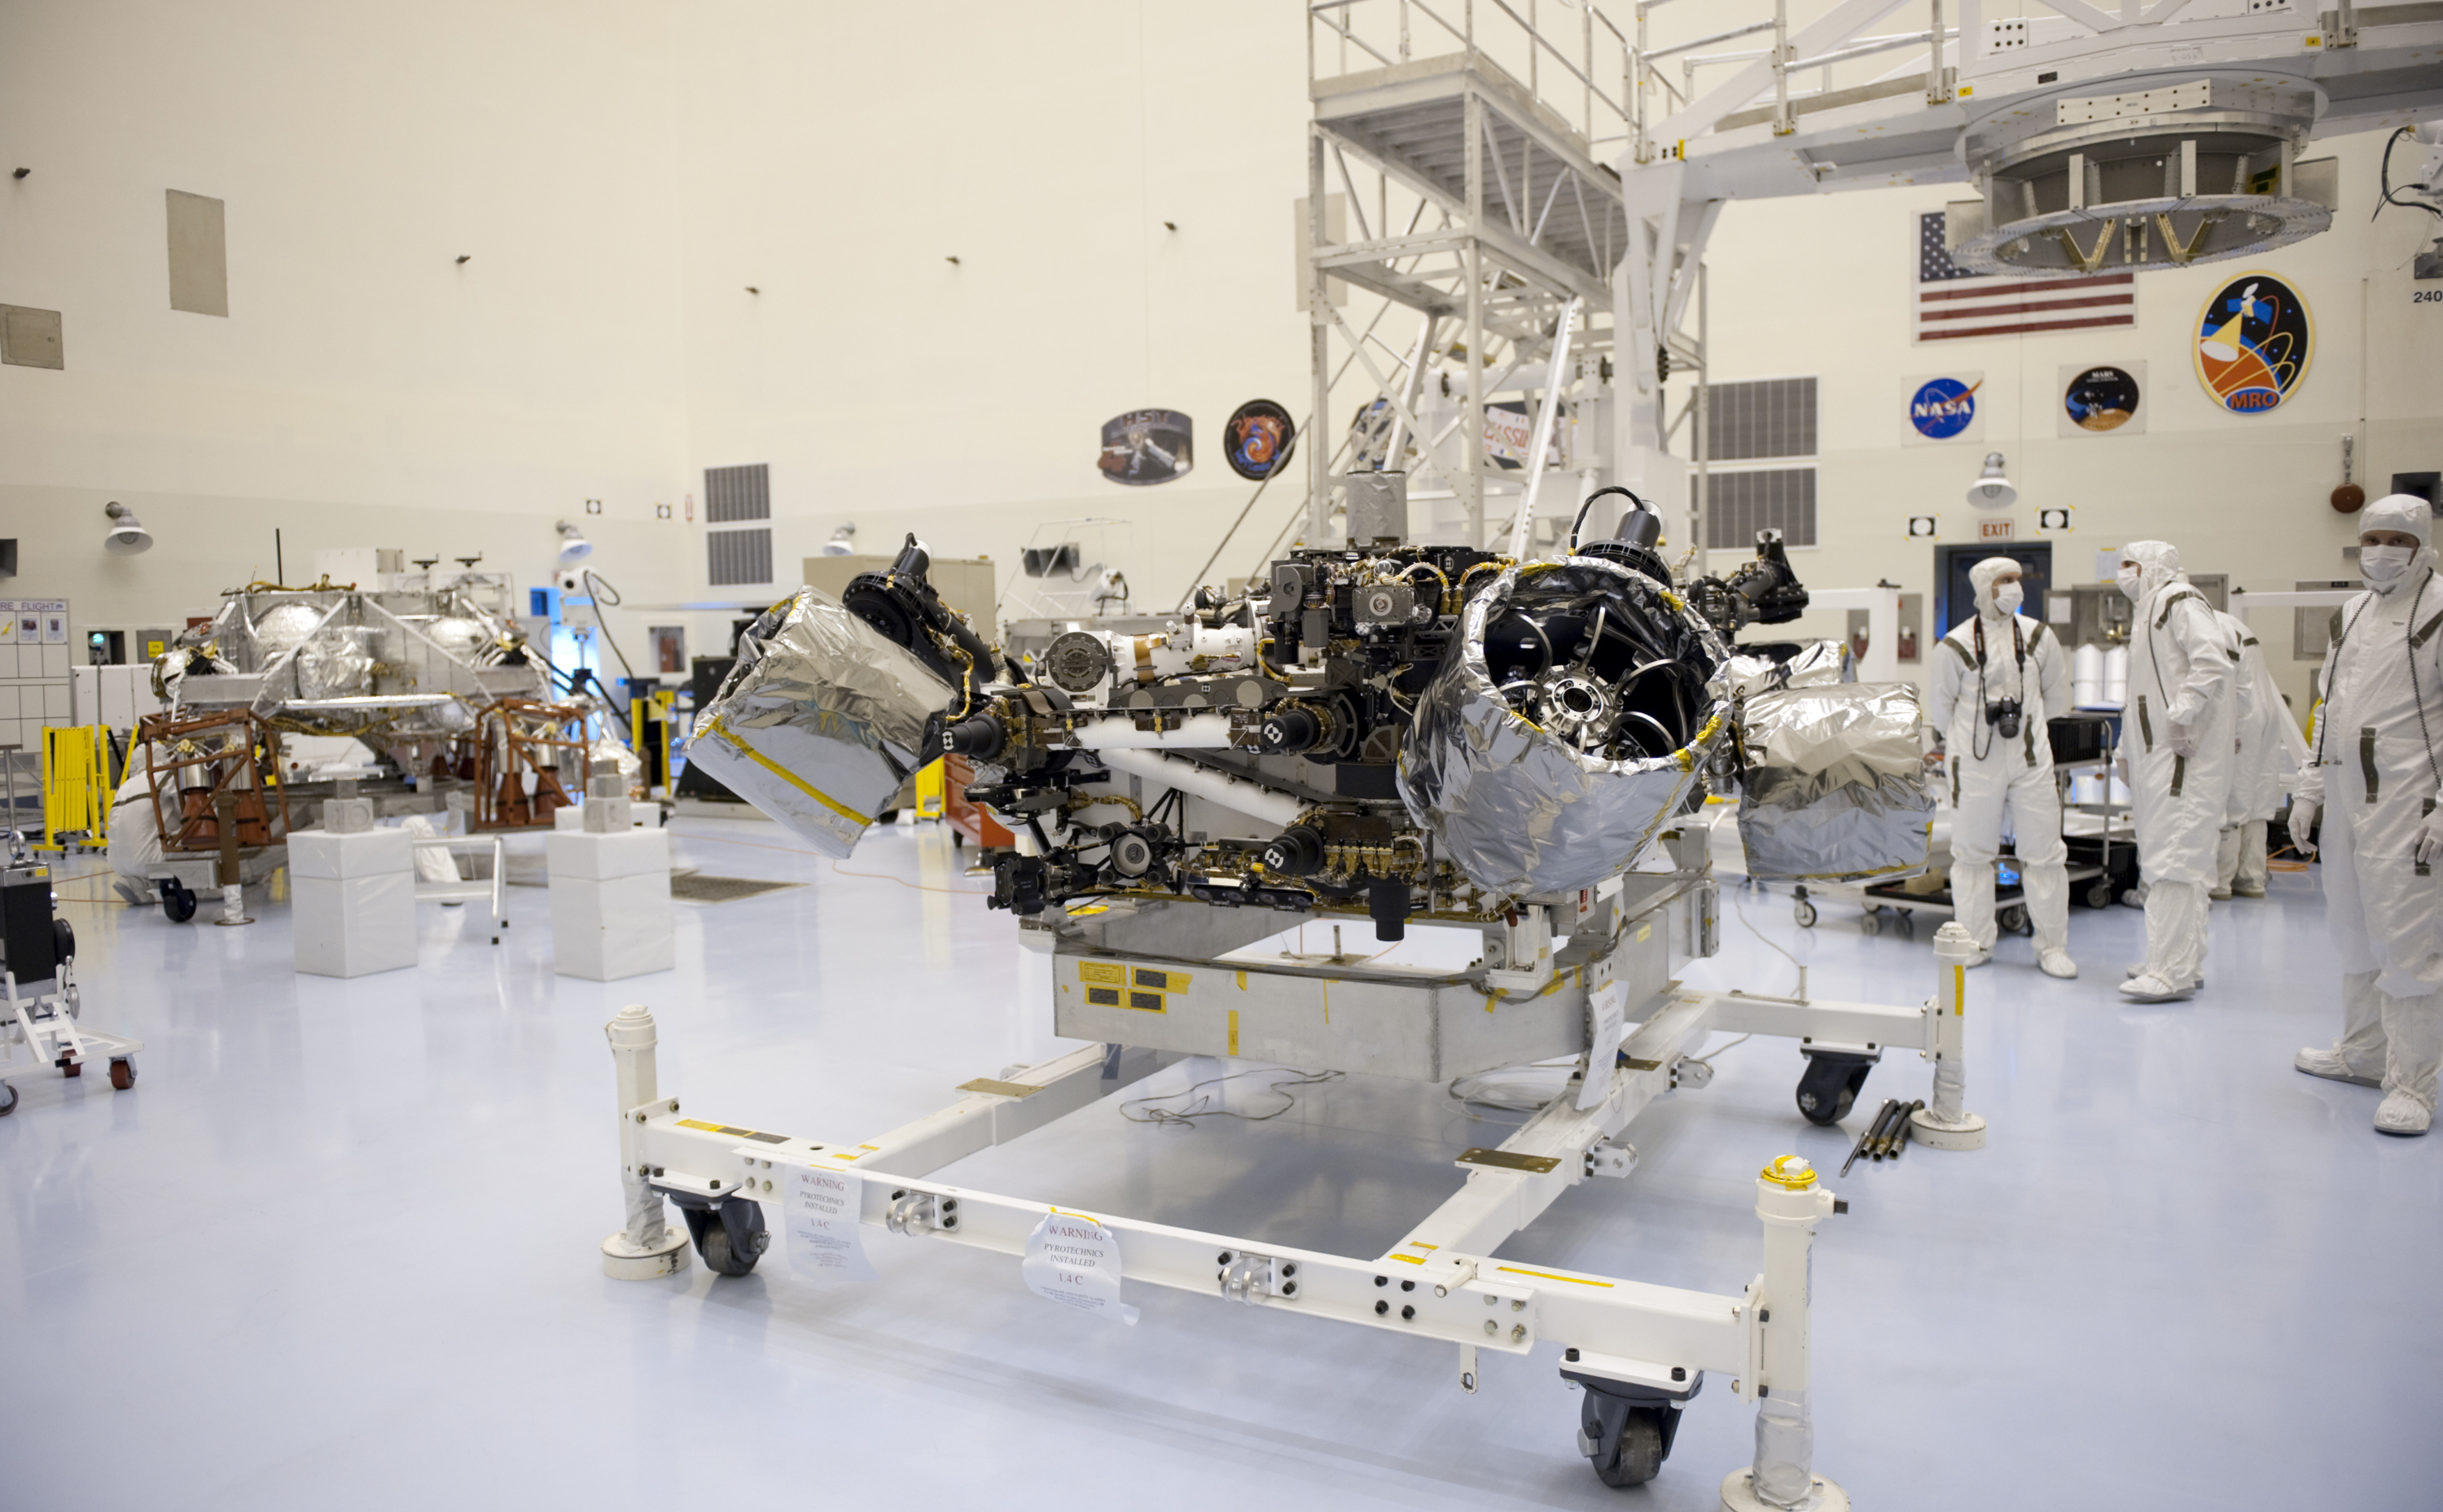 At the Payload Hazardous Servicing Facility at NASA's Kennedy Space Center in Florida, NASA's Mars Science Laboratory (MSL) rover, known as Curiosity, will be integrated with a rocket-powered descent stage (shown here to the left of the rover).